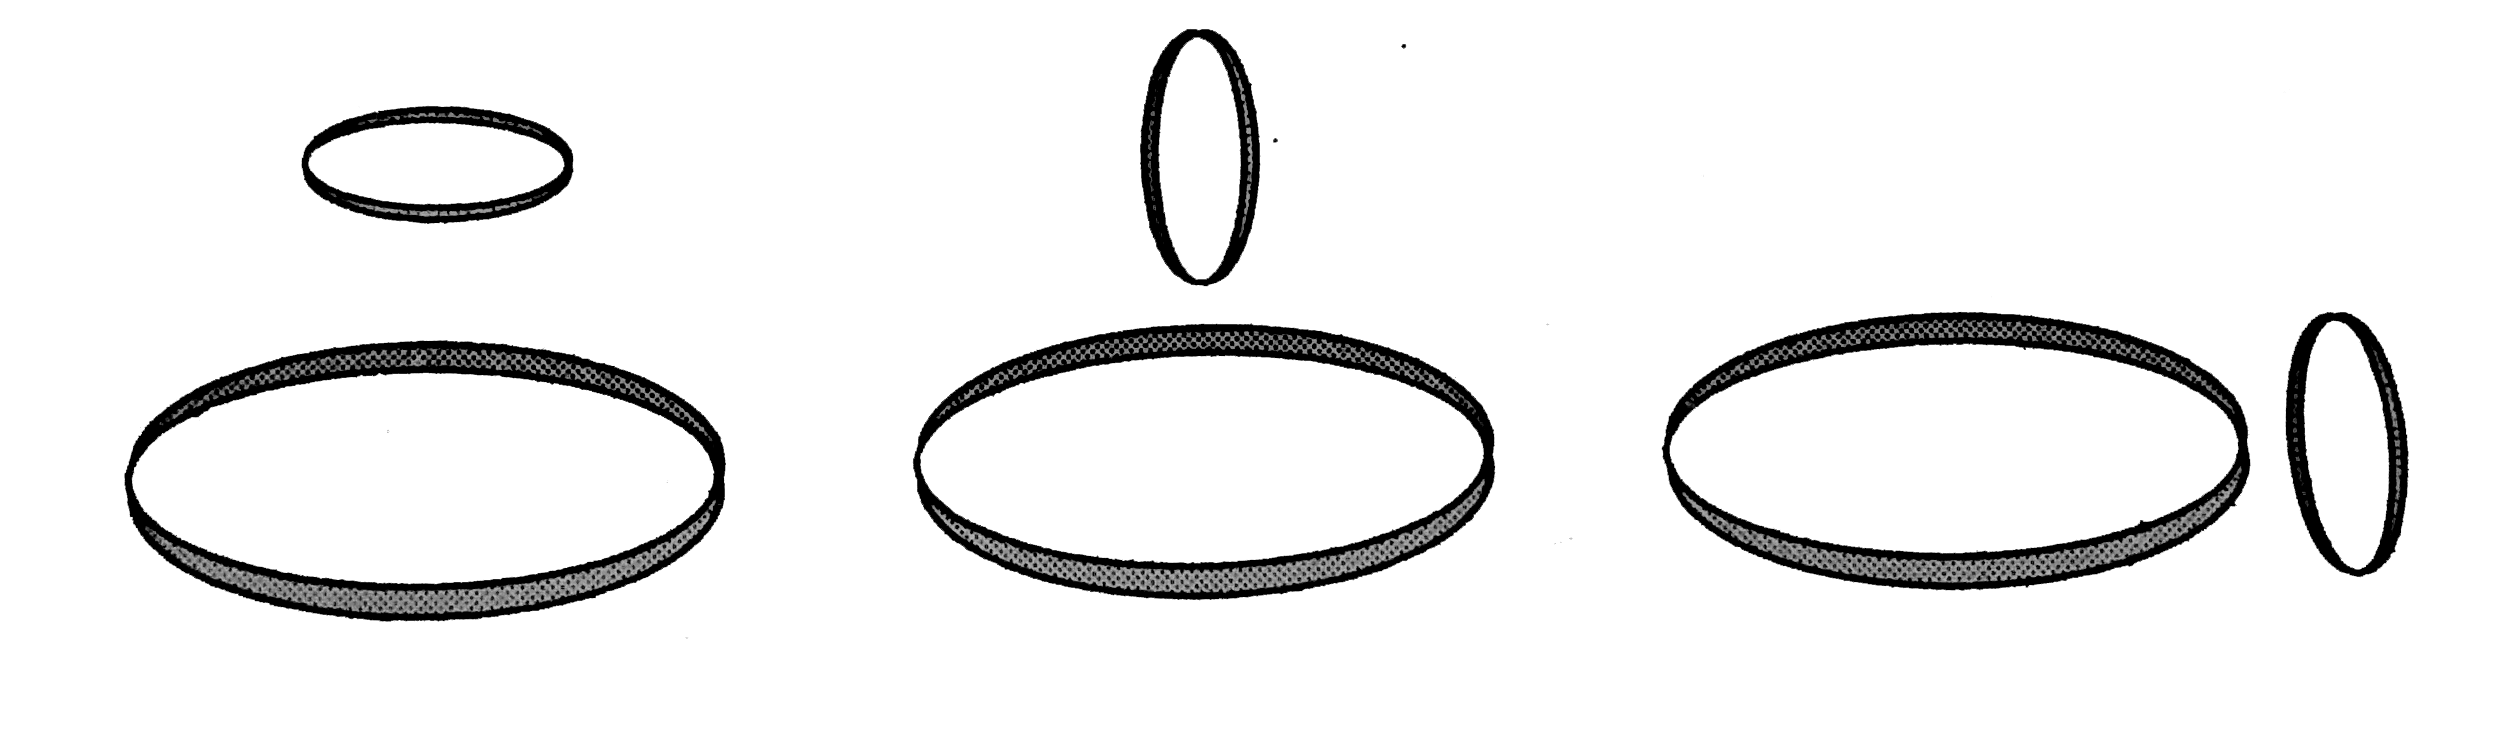 Two circular coils can be arranged in any of the three situation shown in the figure. Their mutual inductance will be